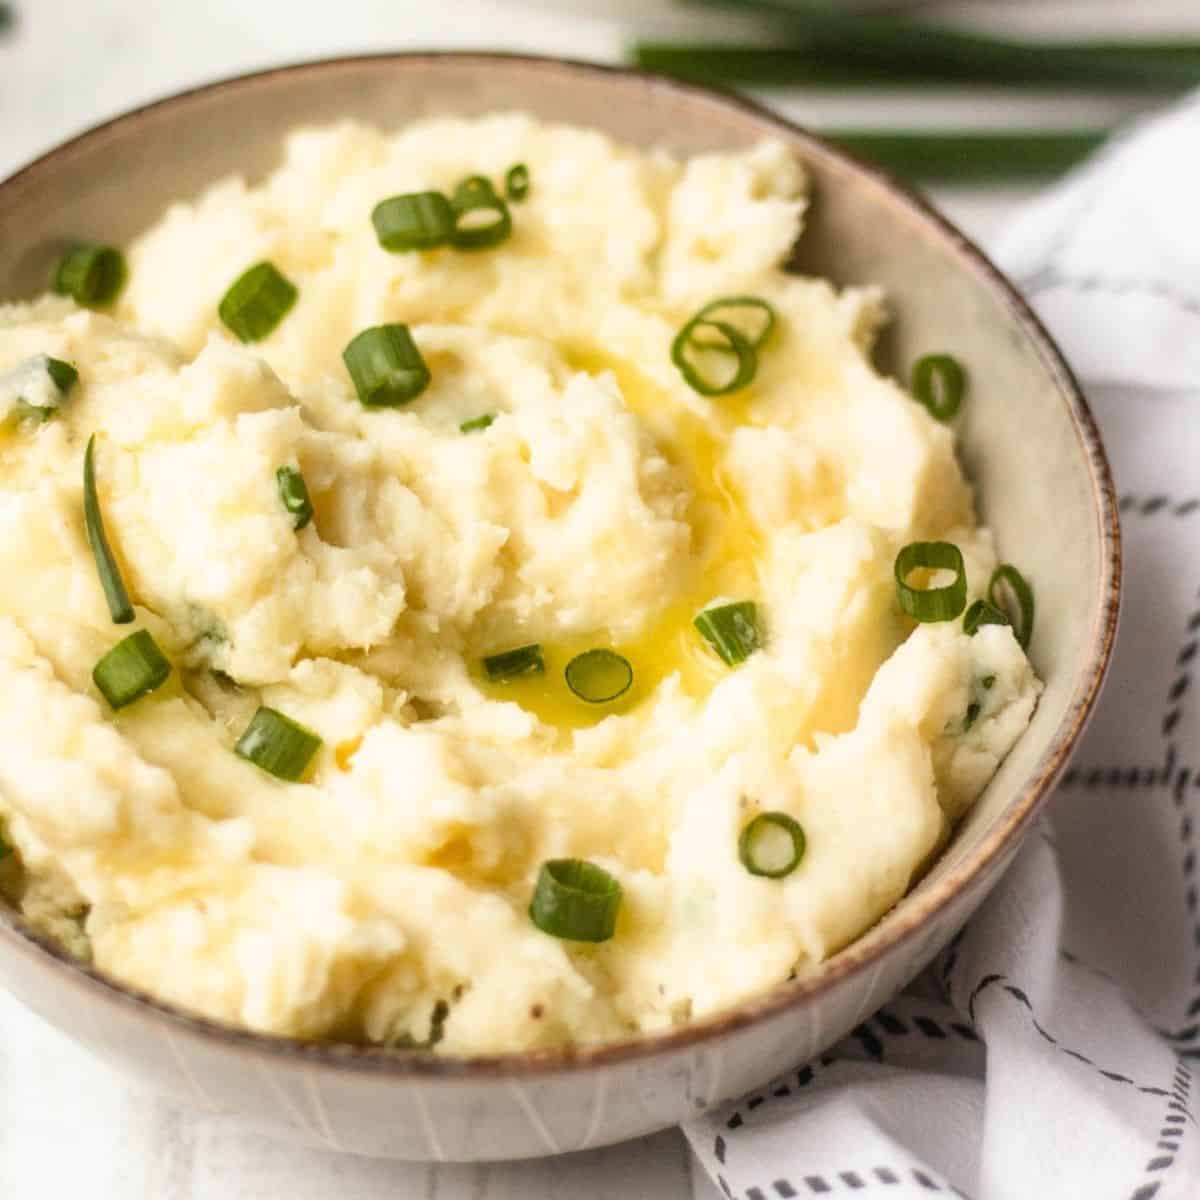 Bowl of horseradish mashed potatoes topped with melted butter and chopped green onions.